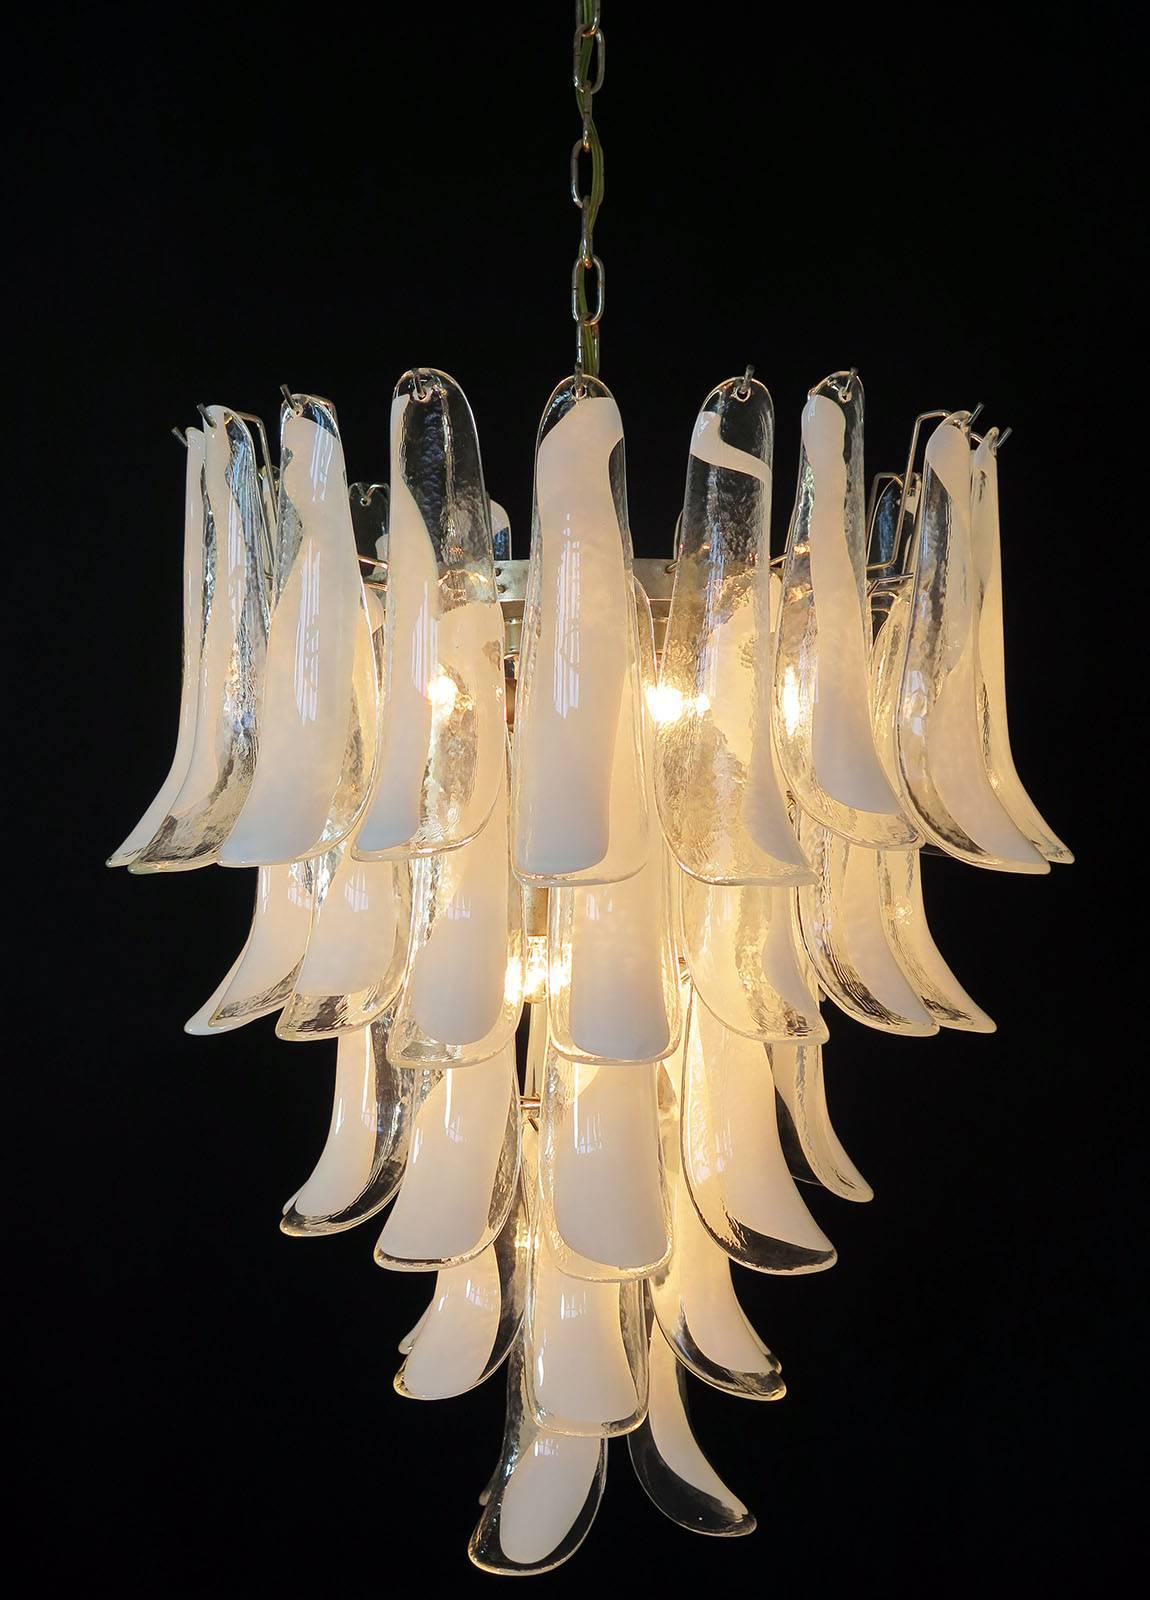 Huge Italian vintage Murano chandelier made by 52 glass petals ( clear and white “lattimo”) supported by a chrome frame 
Period: 1960s / 1970s
Dimensions: 55.10 inches (140 cm) height with chain; 29.50 inches (75 cm) height without chain; 26